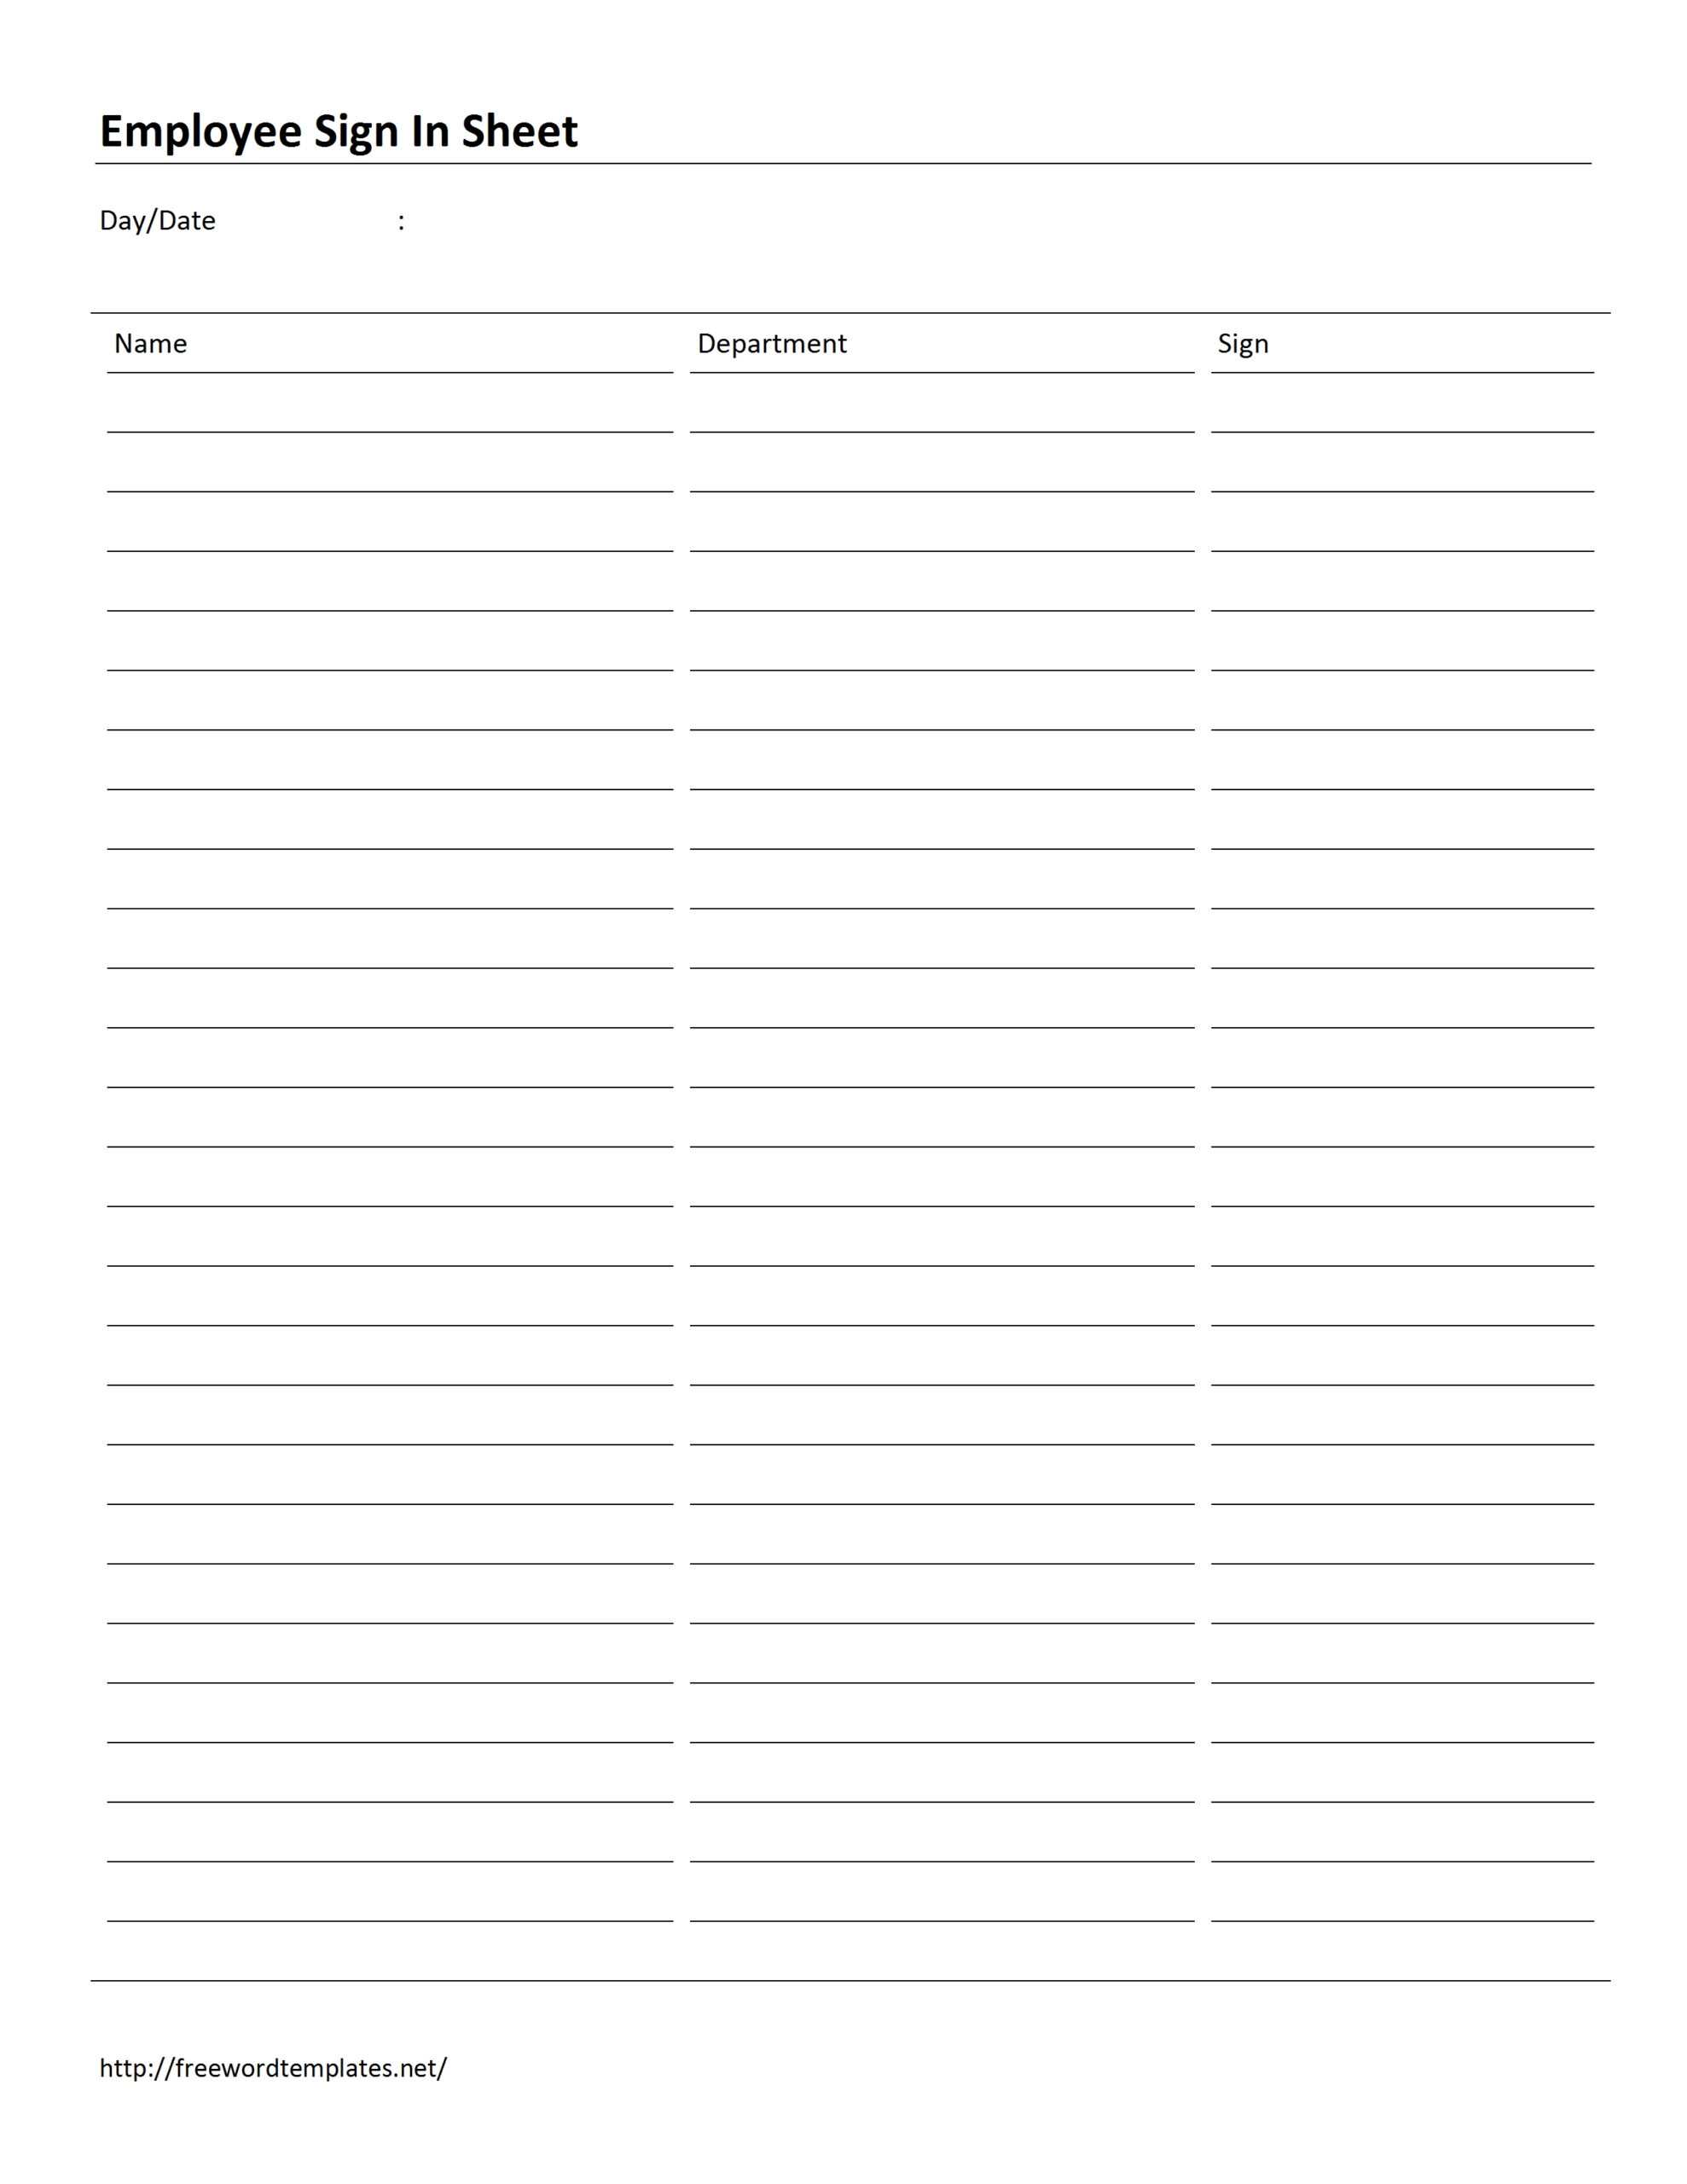 Employee Attendance Sign In Sheet Template With 3 Column Word Template